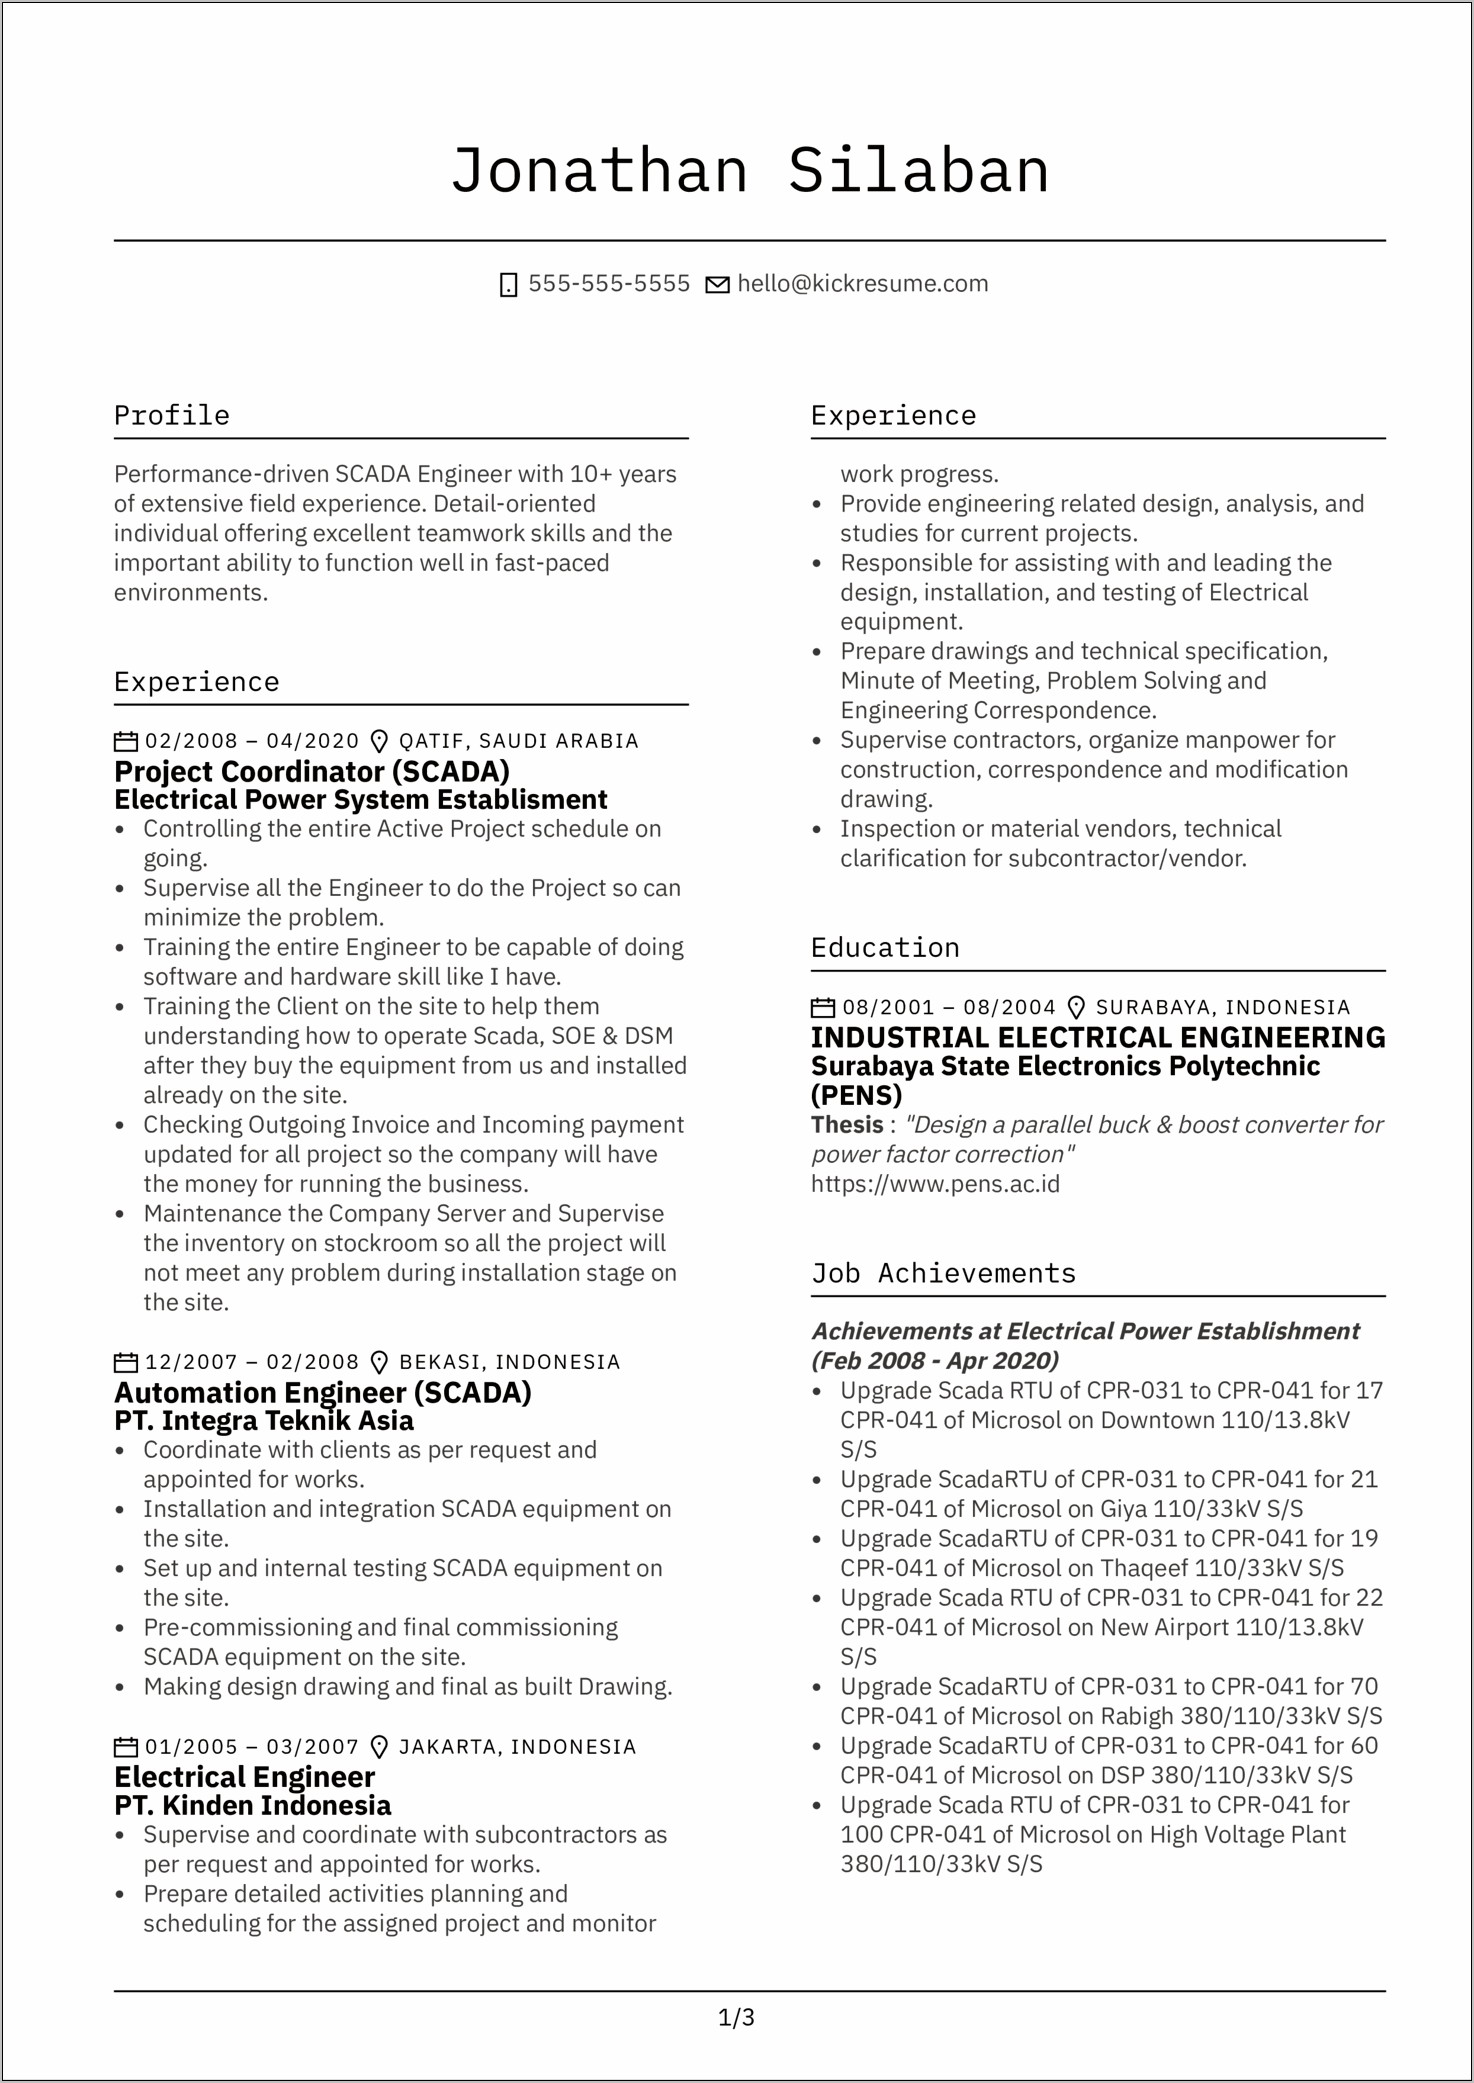 Sample Resume For Plc Automation Engineer - Resume Example Gallery